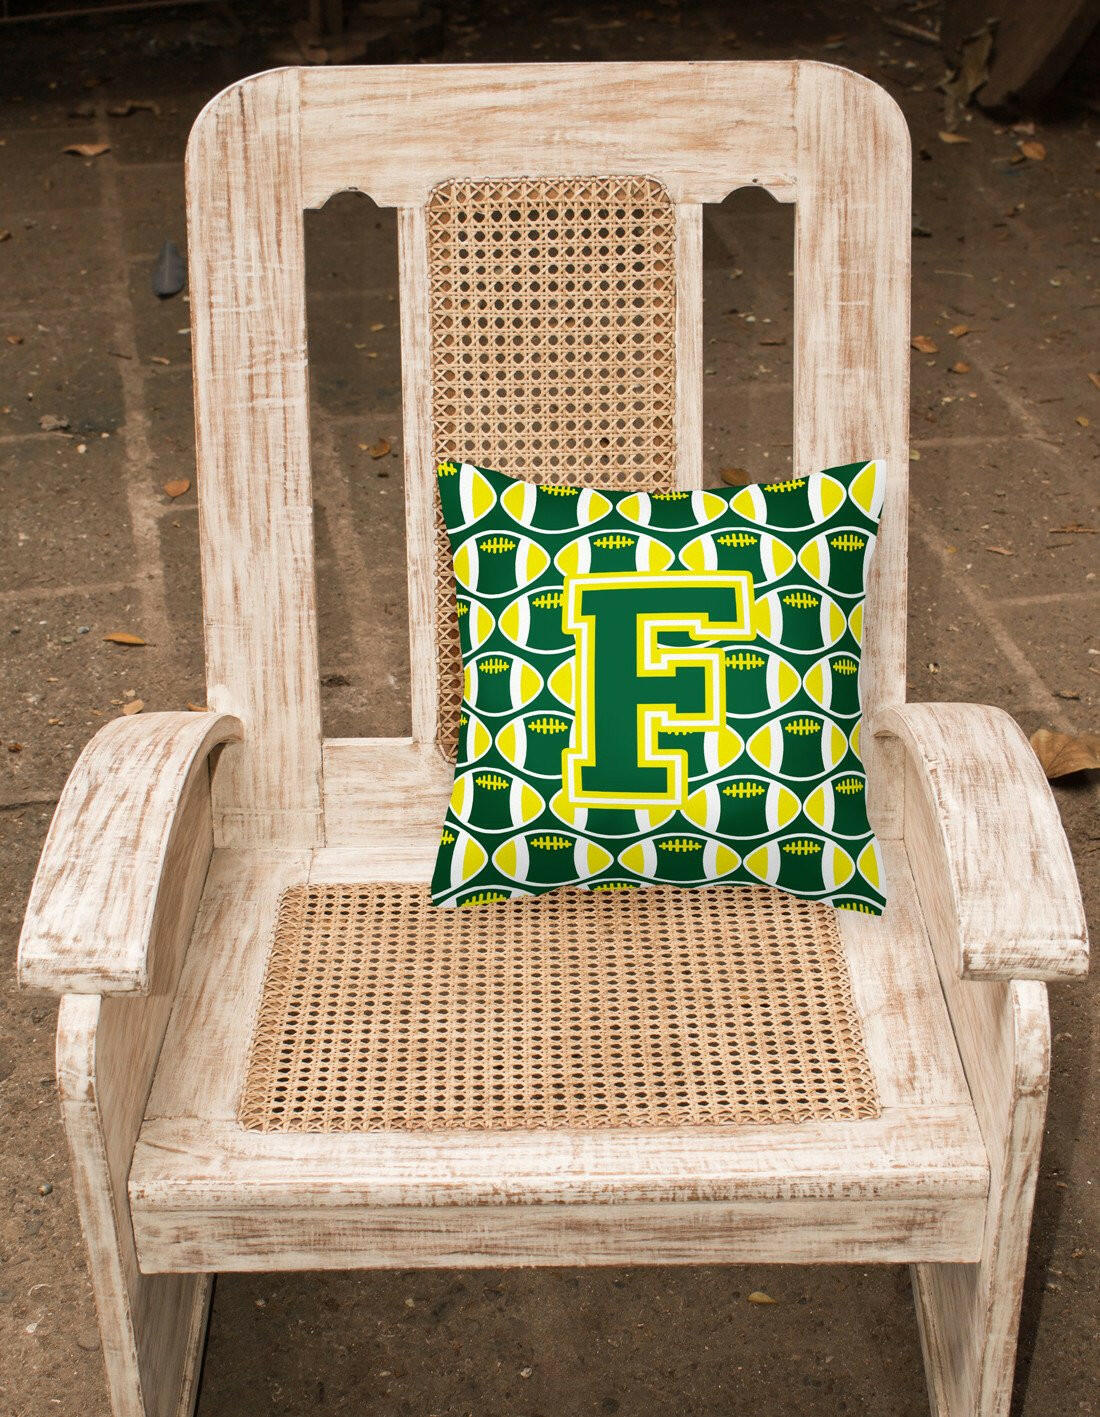 Letter F Football Green and Yellow Fabric Decorative Pillow CJ1075-FPW1414 by Caroline's Treasures